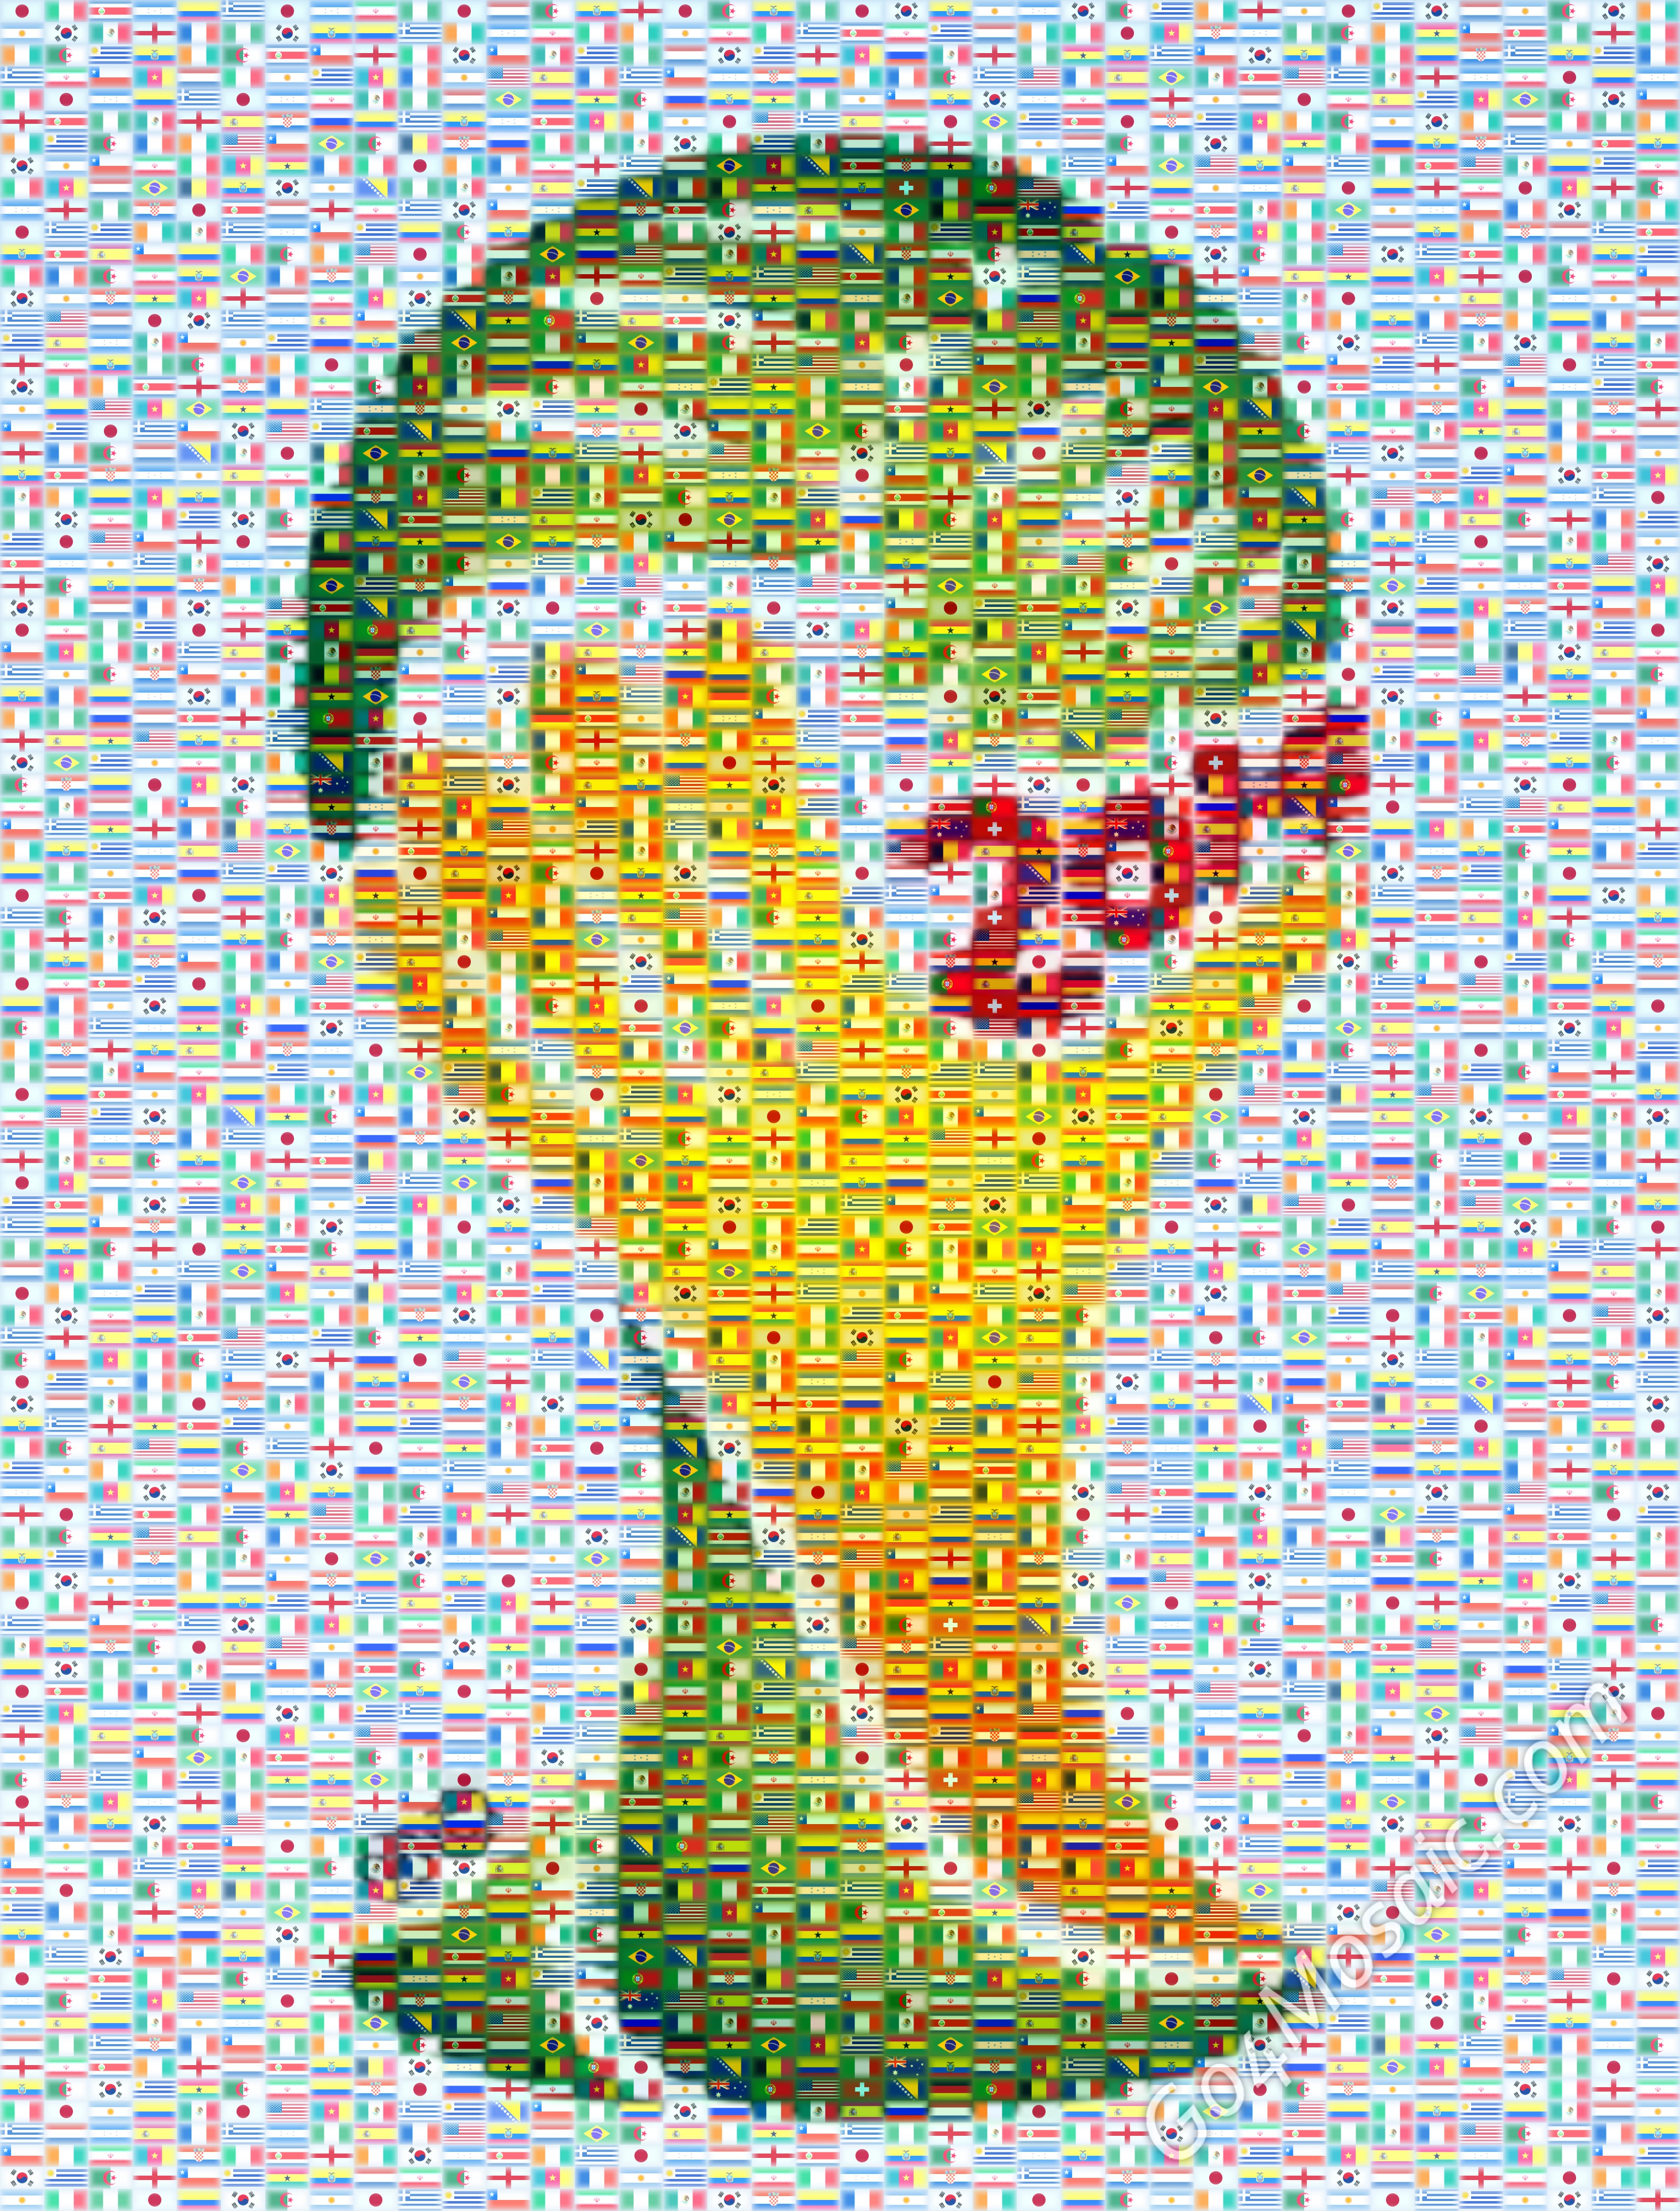 Fifa World Cup 2014 Brazil mosaic from the flags of the participating countries